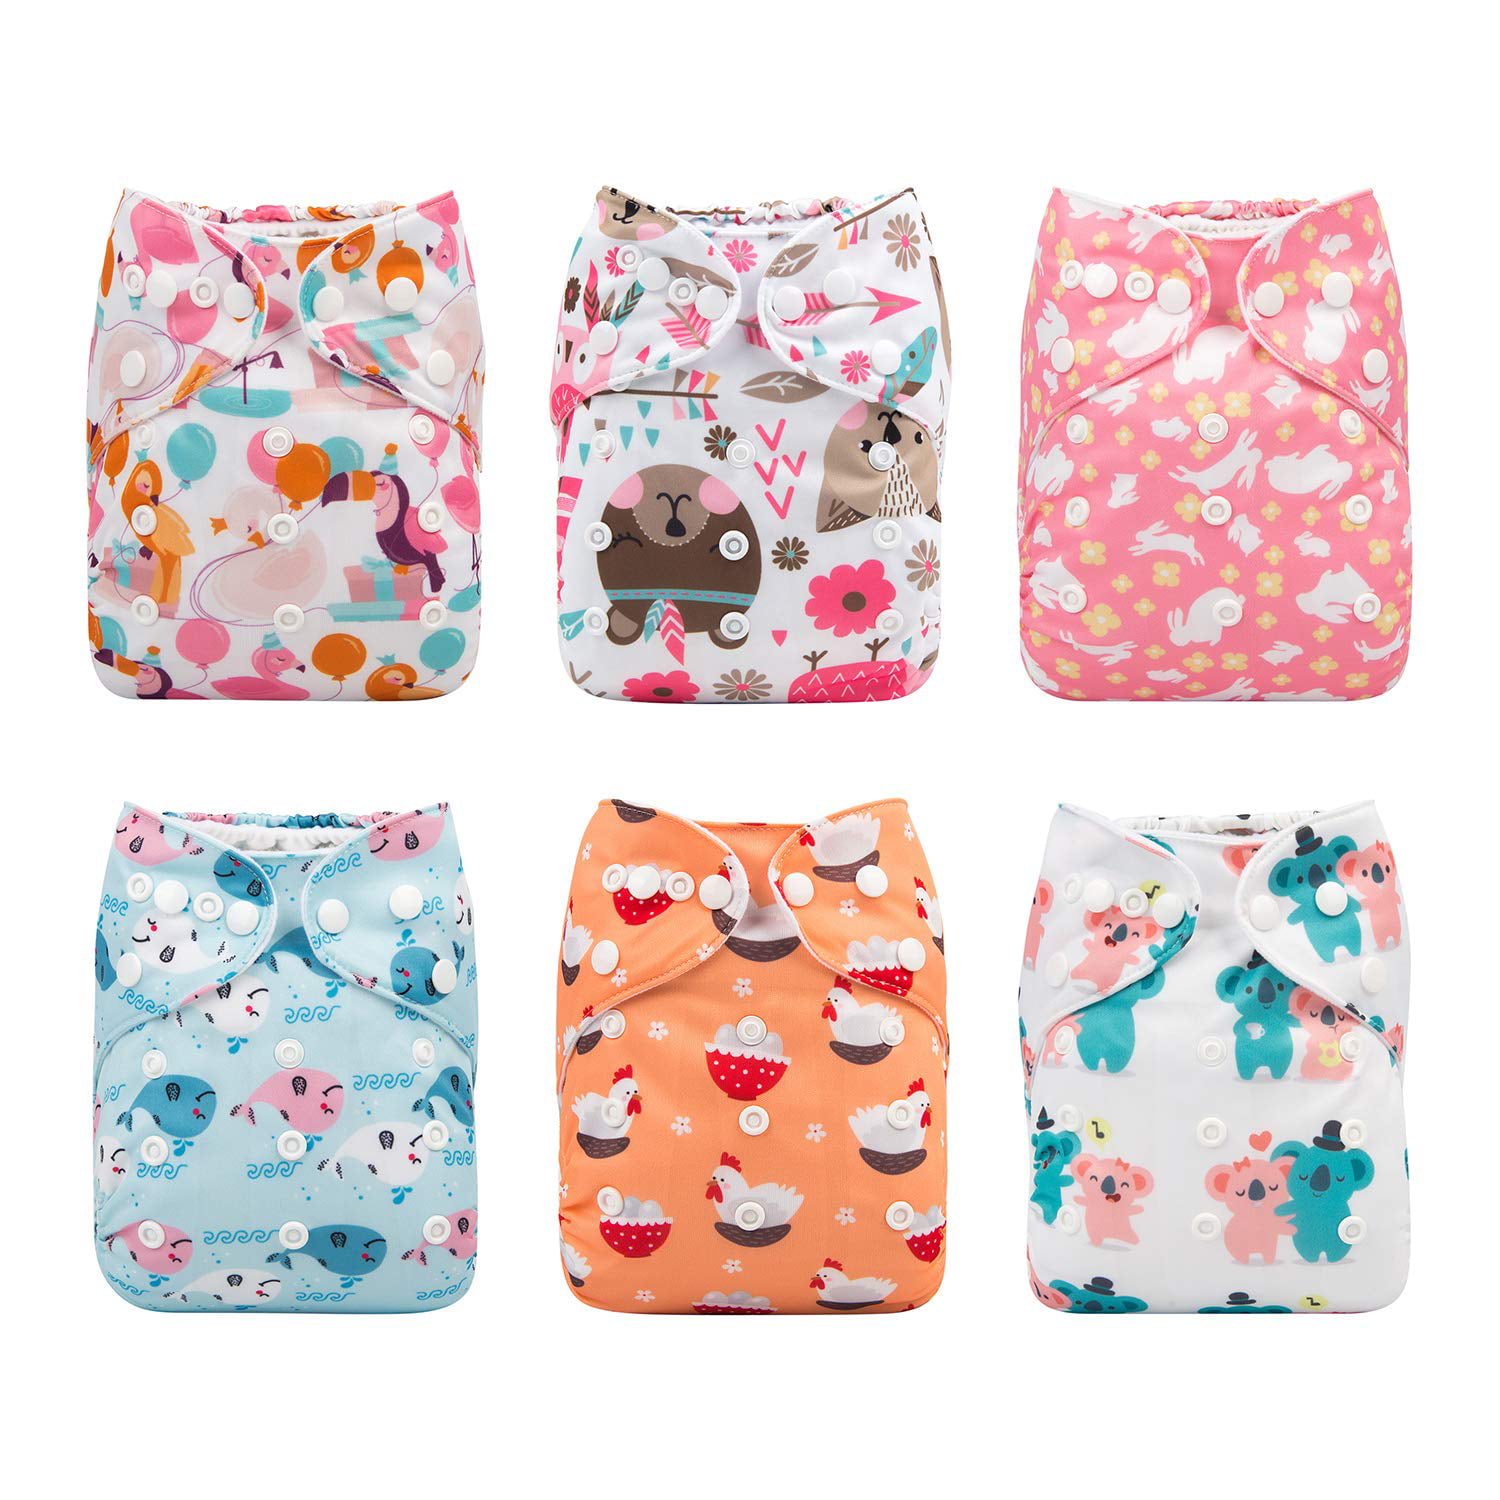 Baby Cloth Diaper Pocket 6 Microfiber Insert for Baby,One Size Adjustable Reusable Waterproof Cloth Diaper Covers 6 Pack